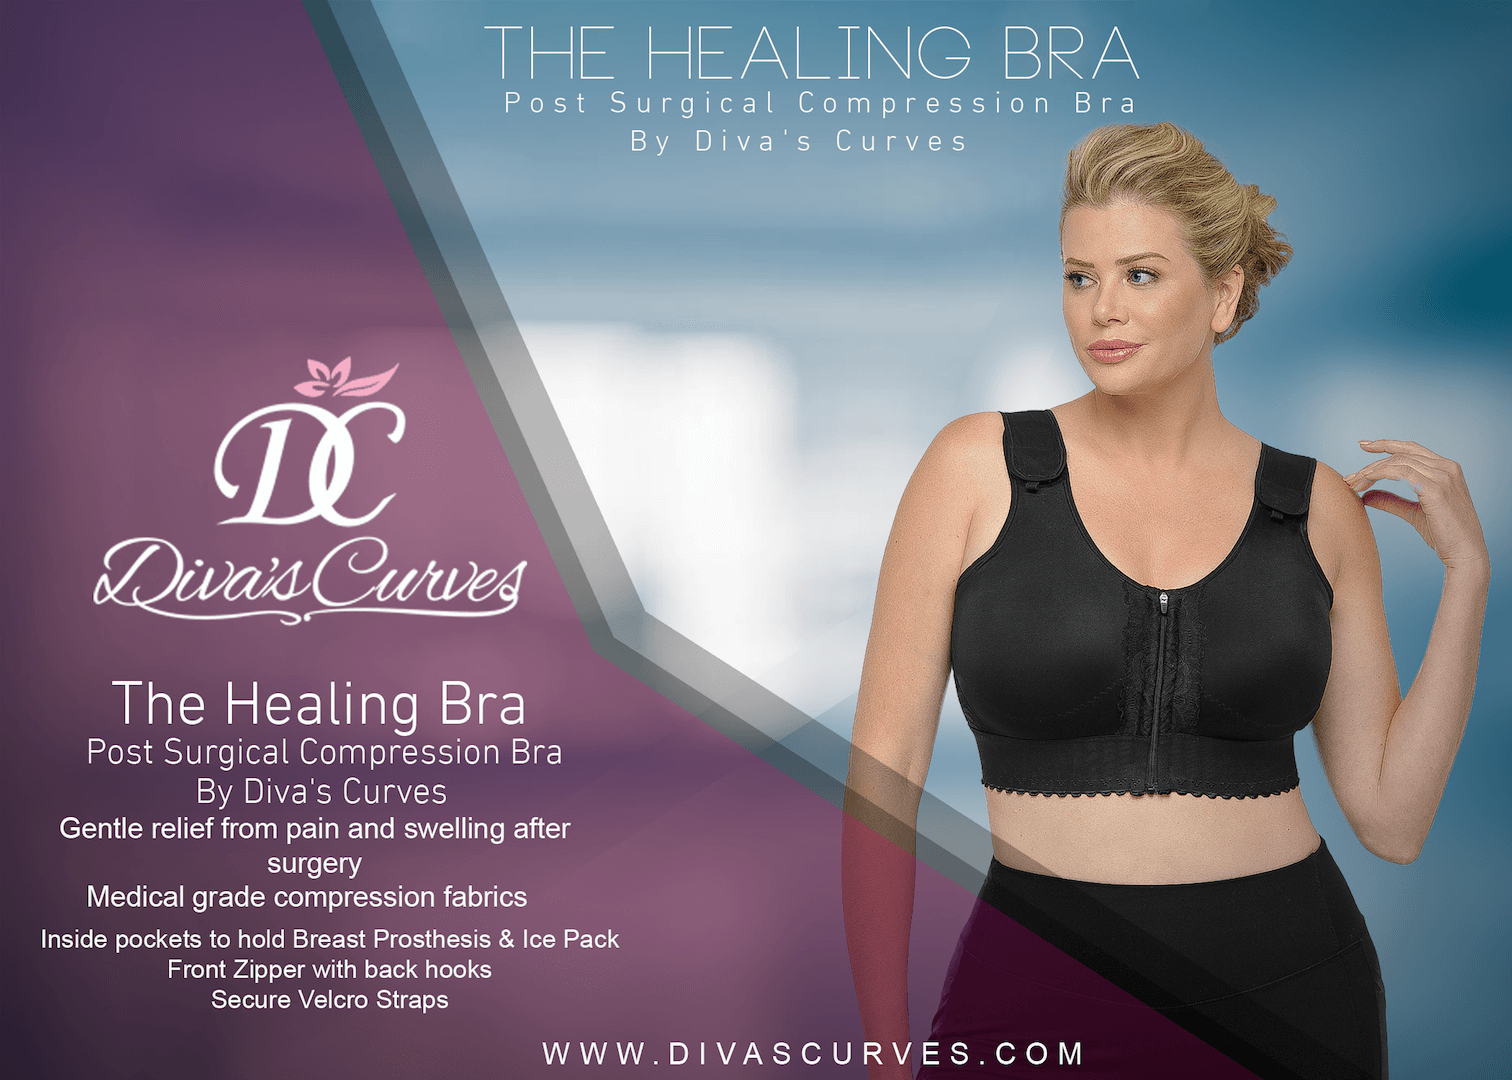 Bra Clinic: Shop for Bras, Compression Garments and Shapewear